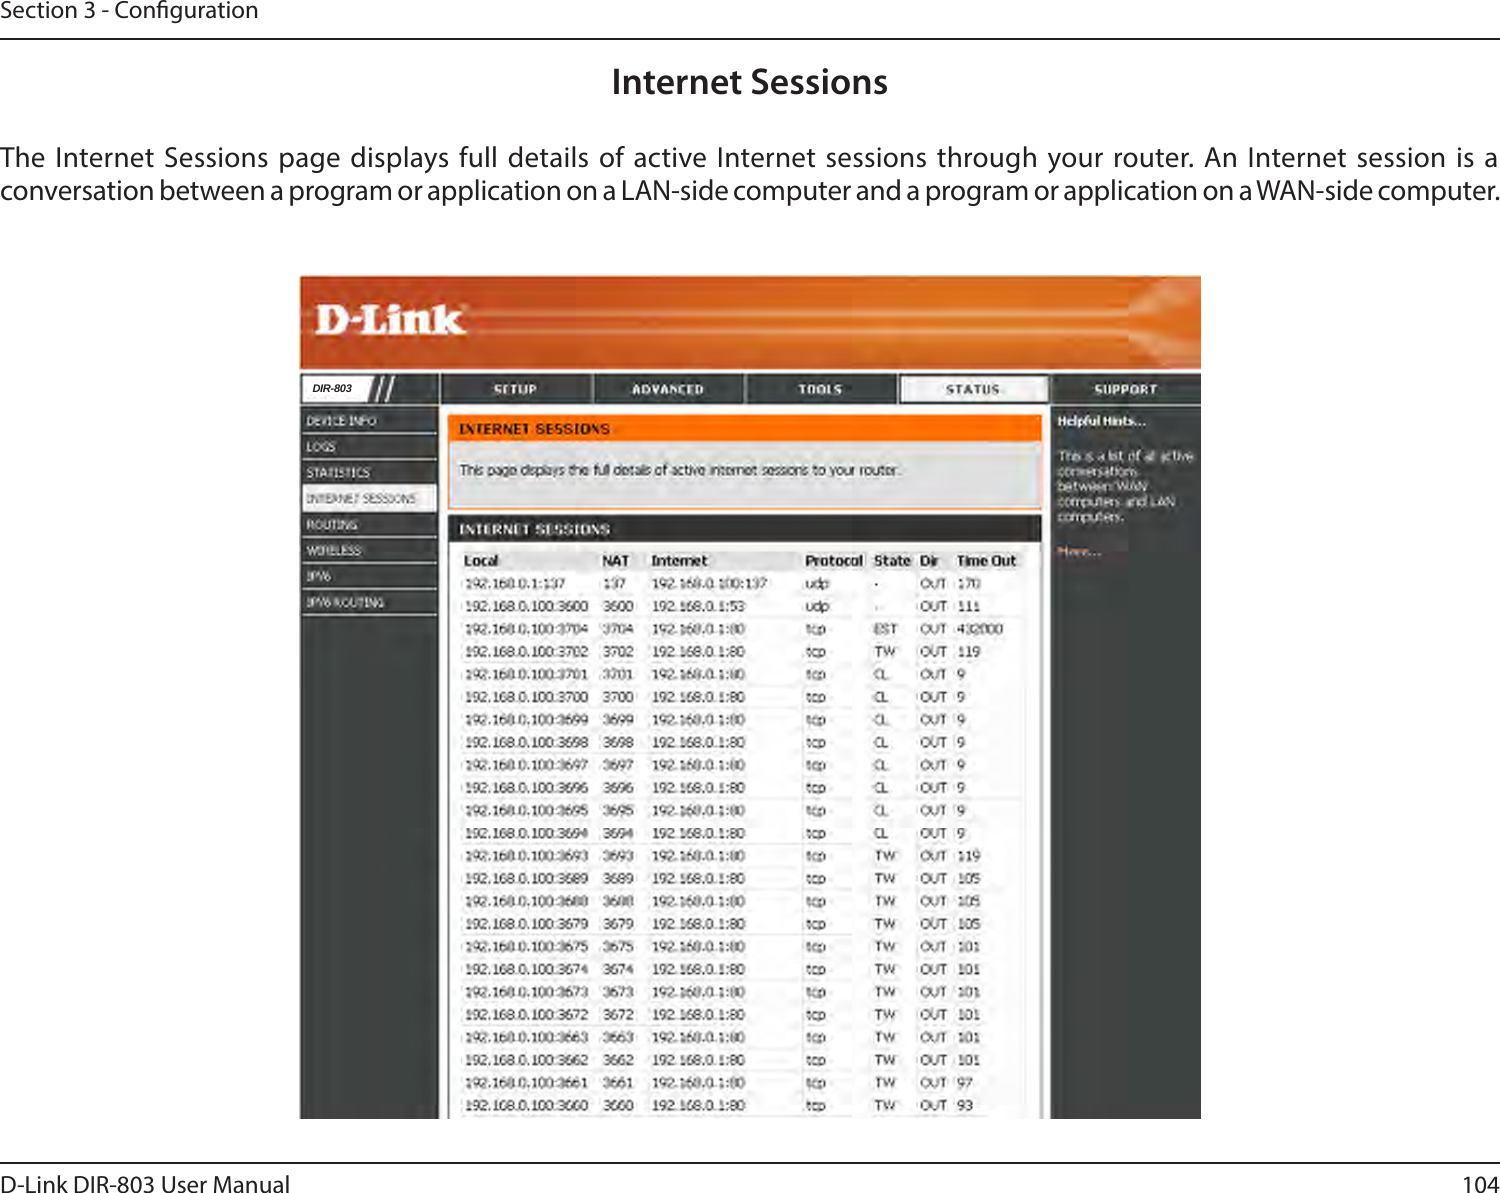 104D-Link DIR-803 User ManualSection 3 - CongurationInternet SessionsThe Internet Sessions page displays full details of active Internet sessions through your router. An Internet session is a conversation between a program or application on a LAN-side computer and a program or application on a WAN-side computer. DIR-803